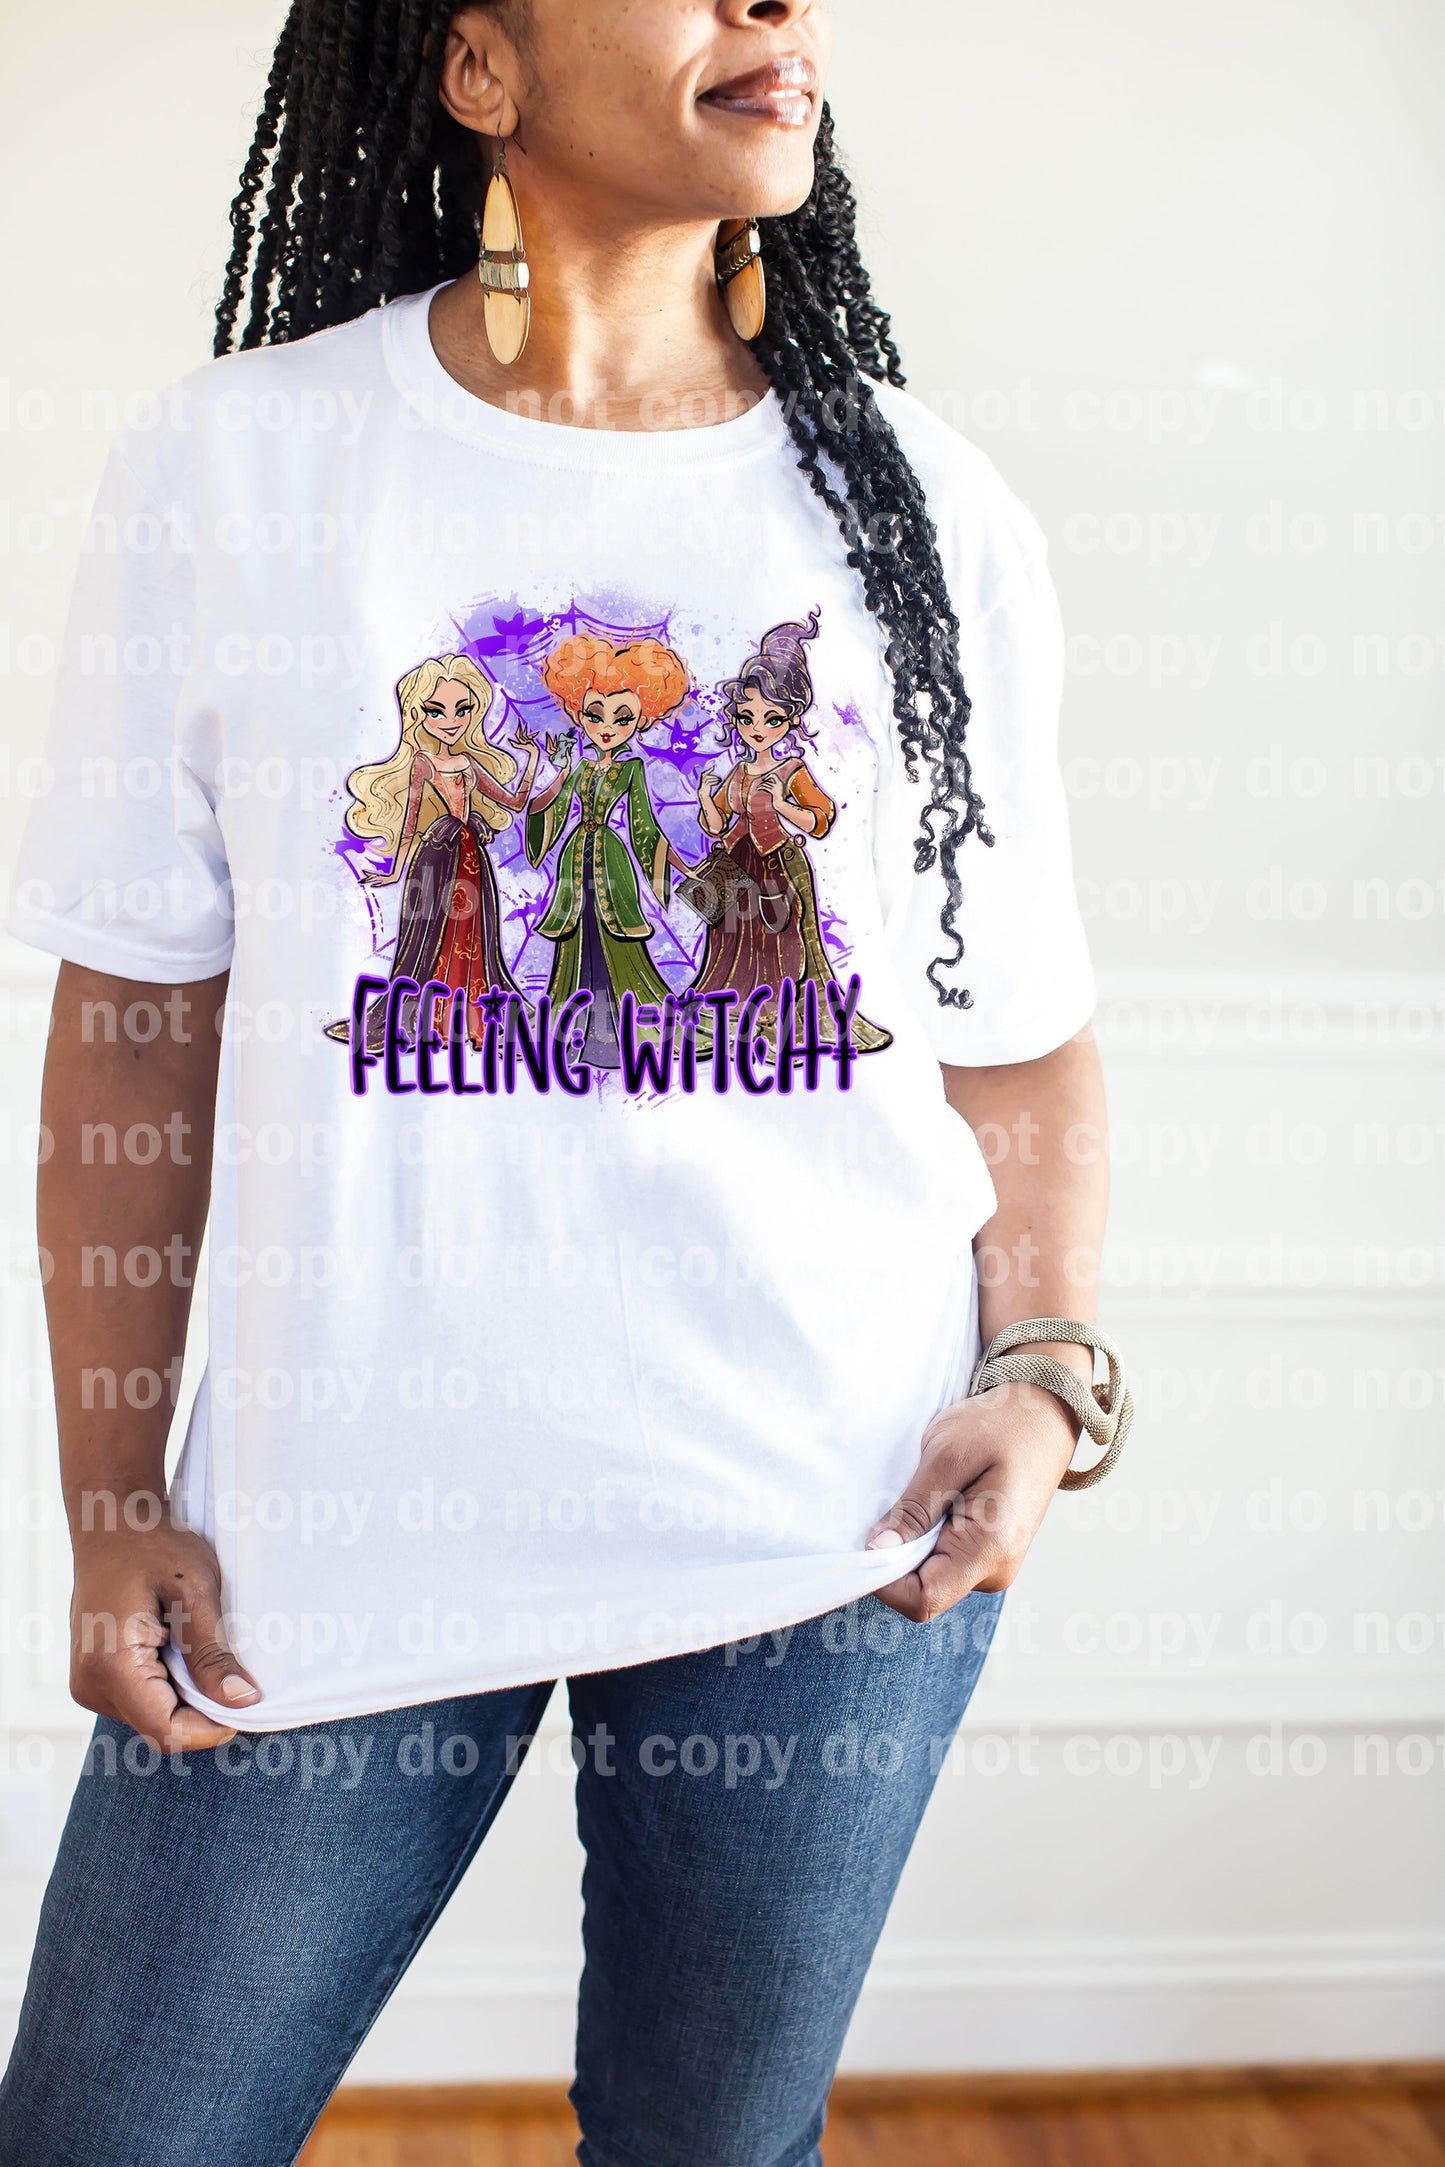 Feeling Witchy Dream Print or Sublimation Print